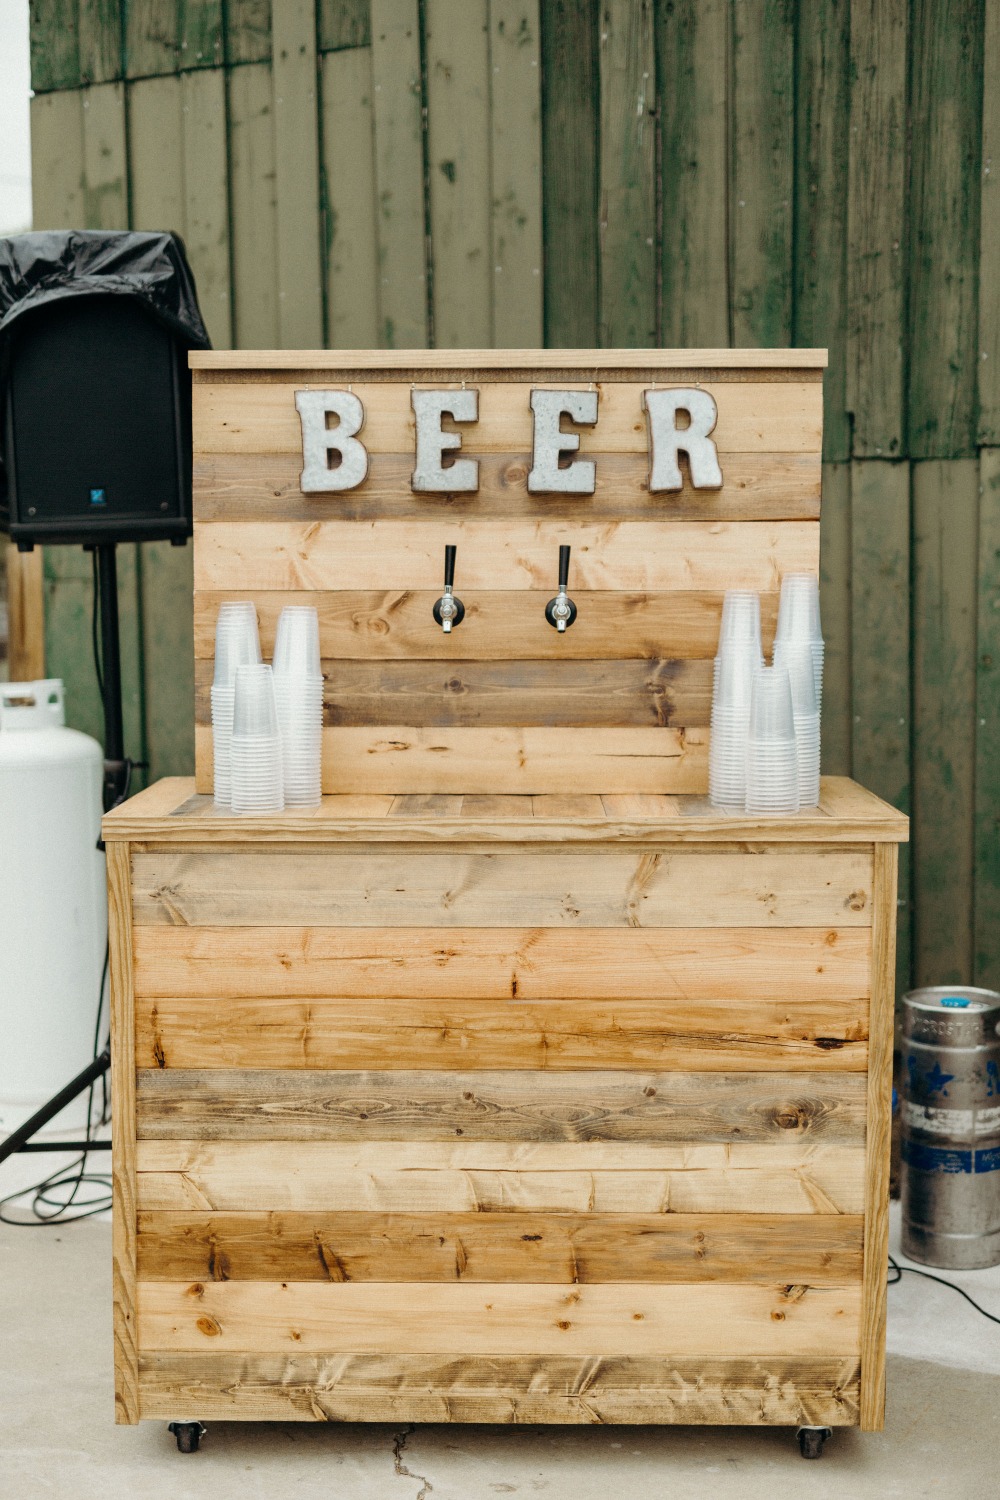 Beer station for a wedding